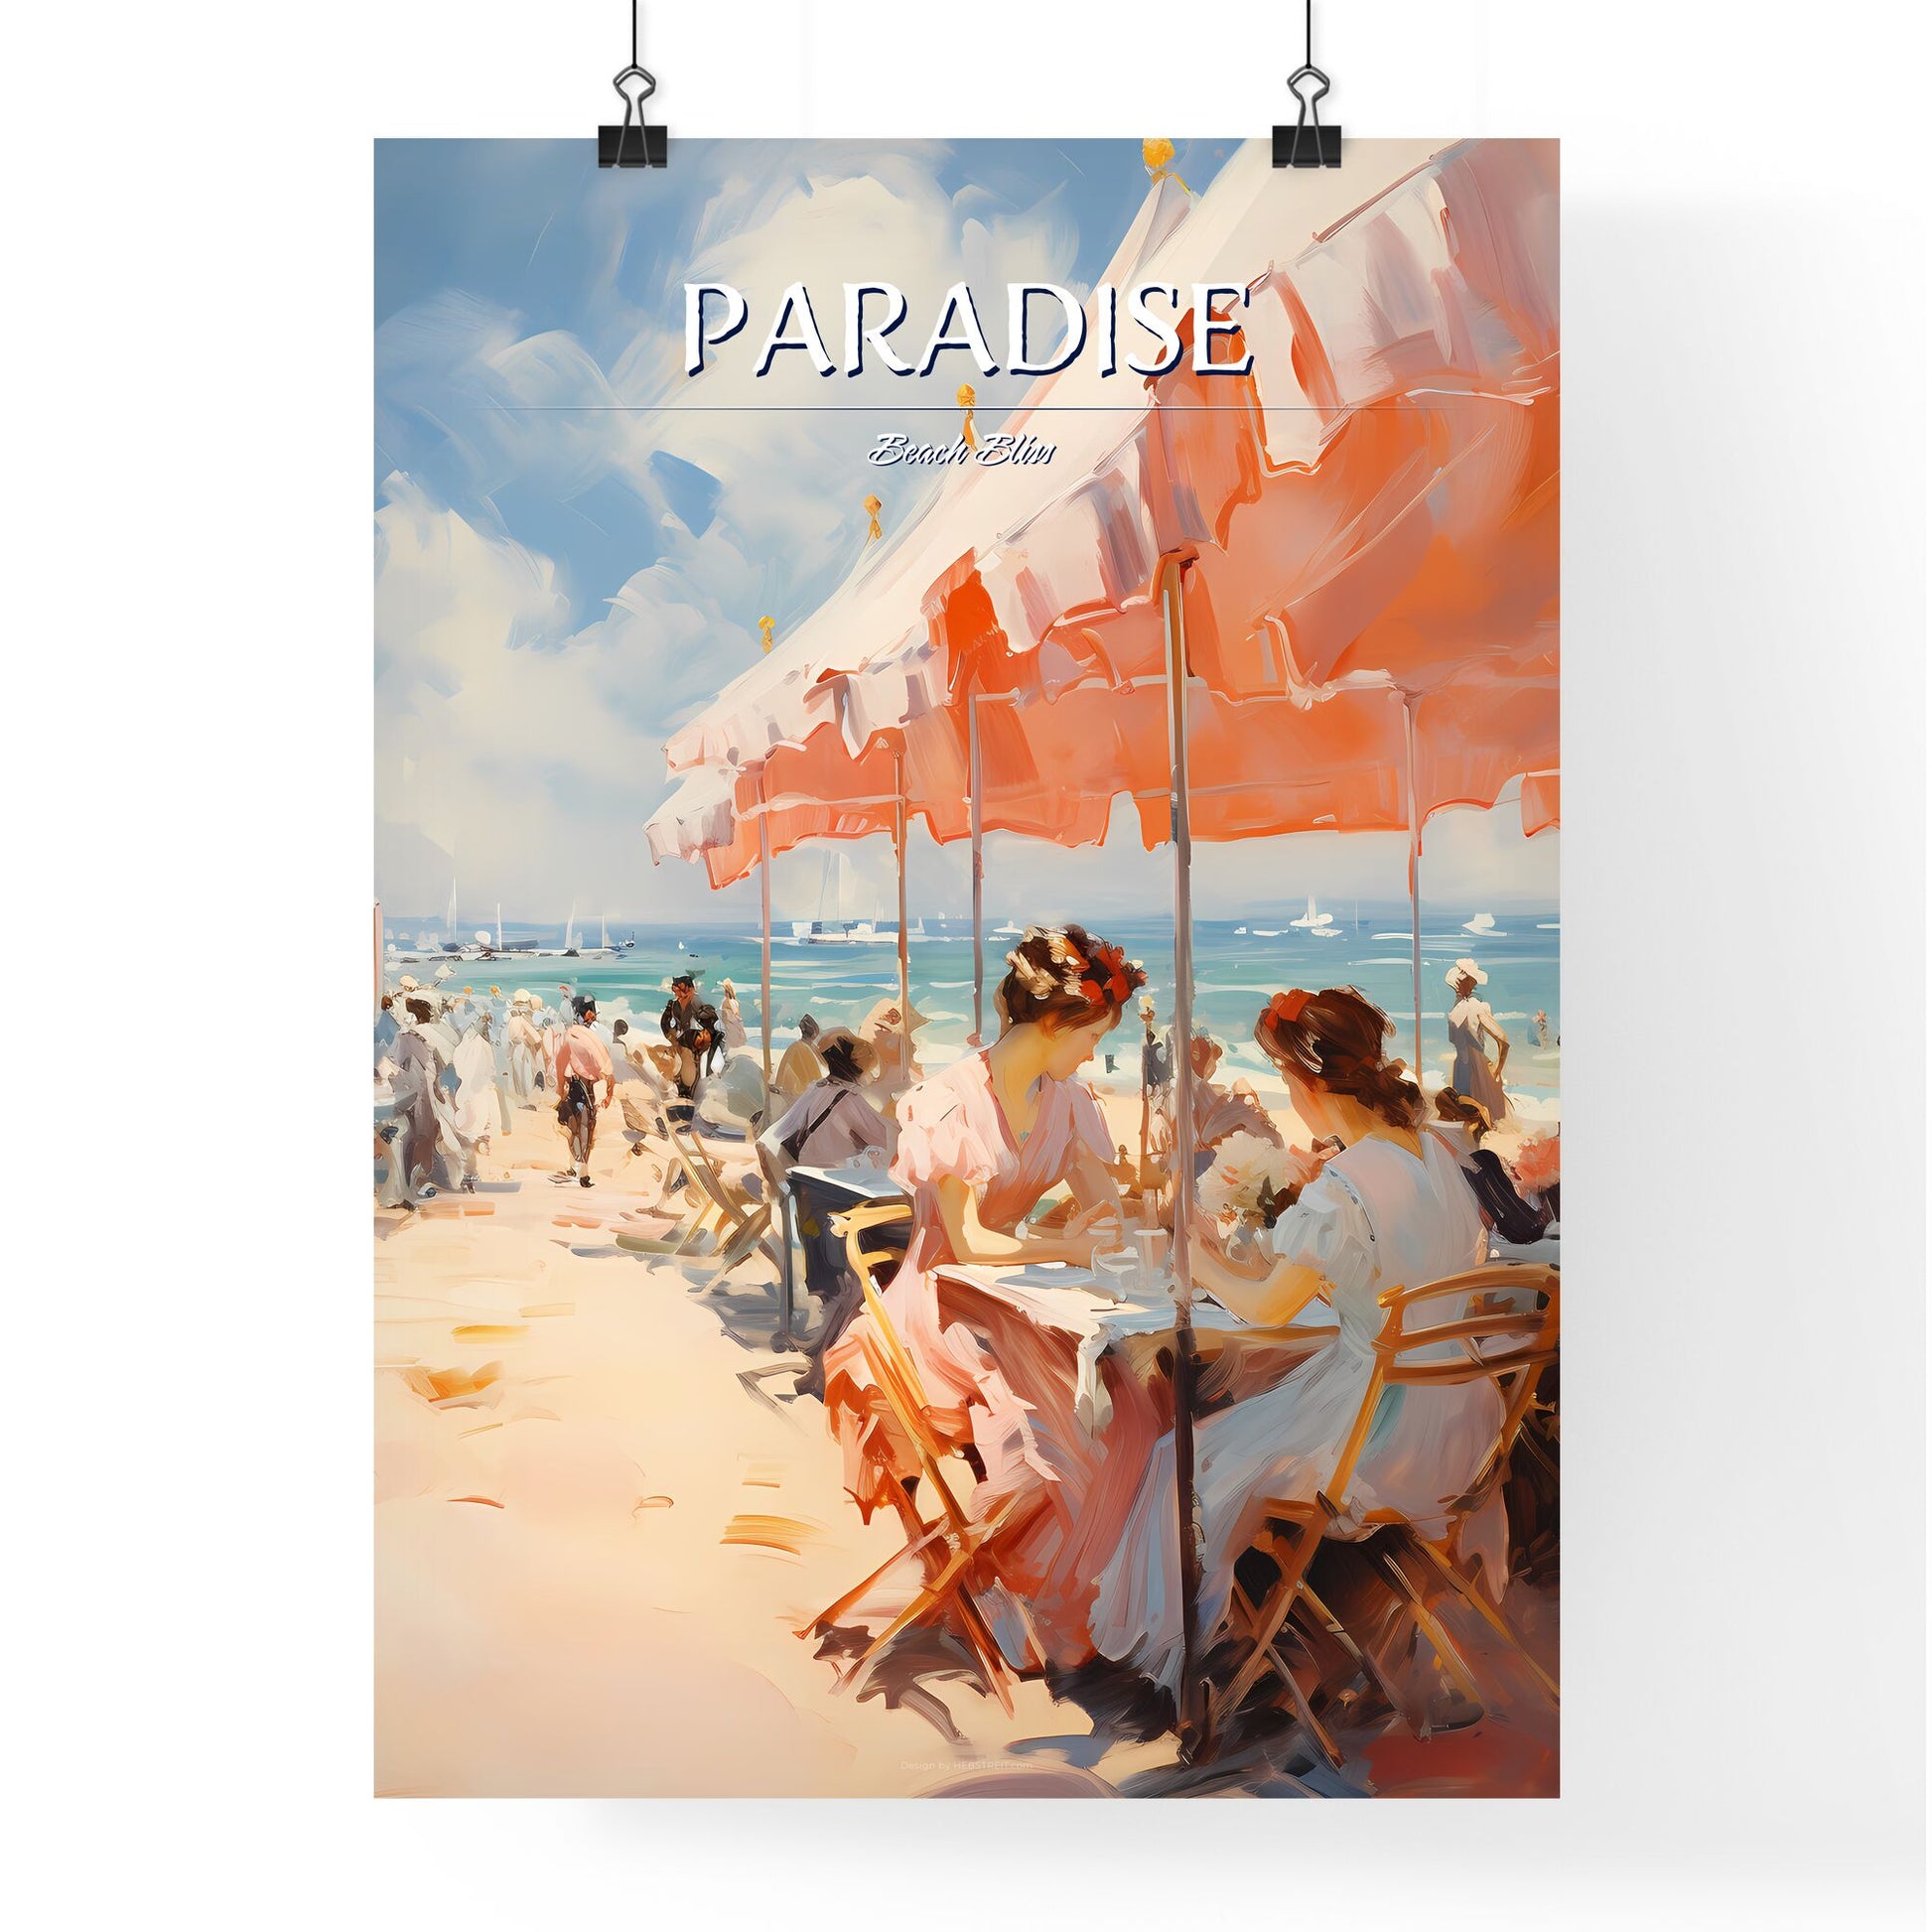 A Group Of People Sitting At A Table Under An Umbrella On A Beach Default Title